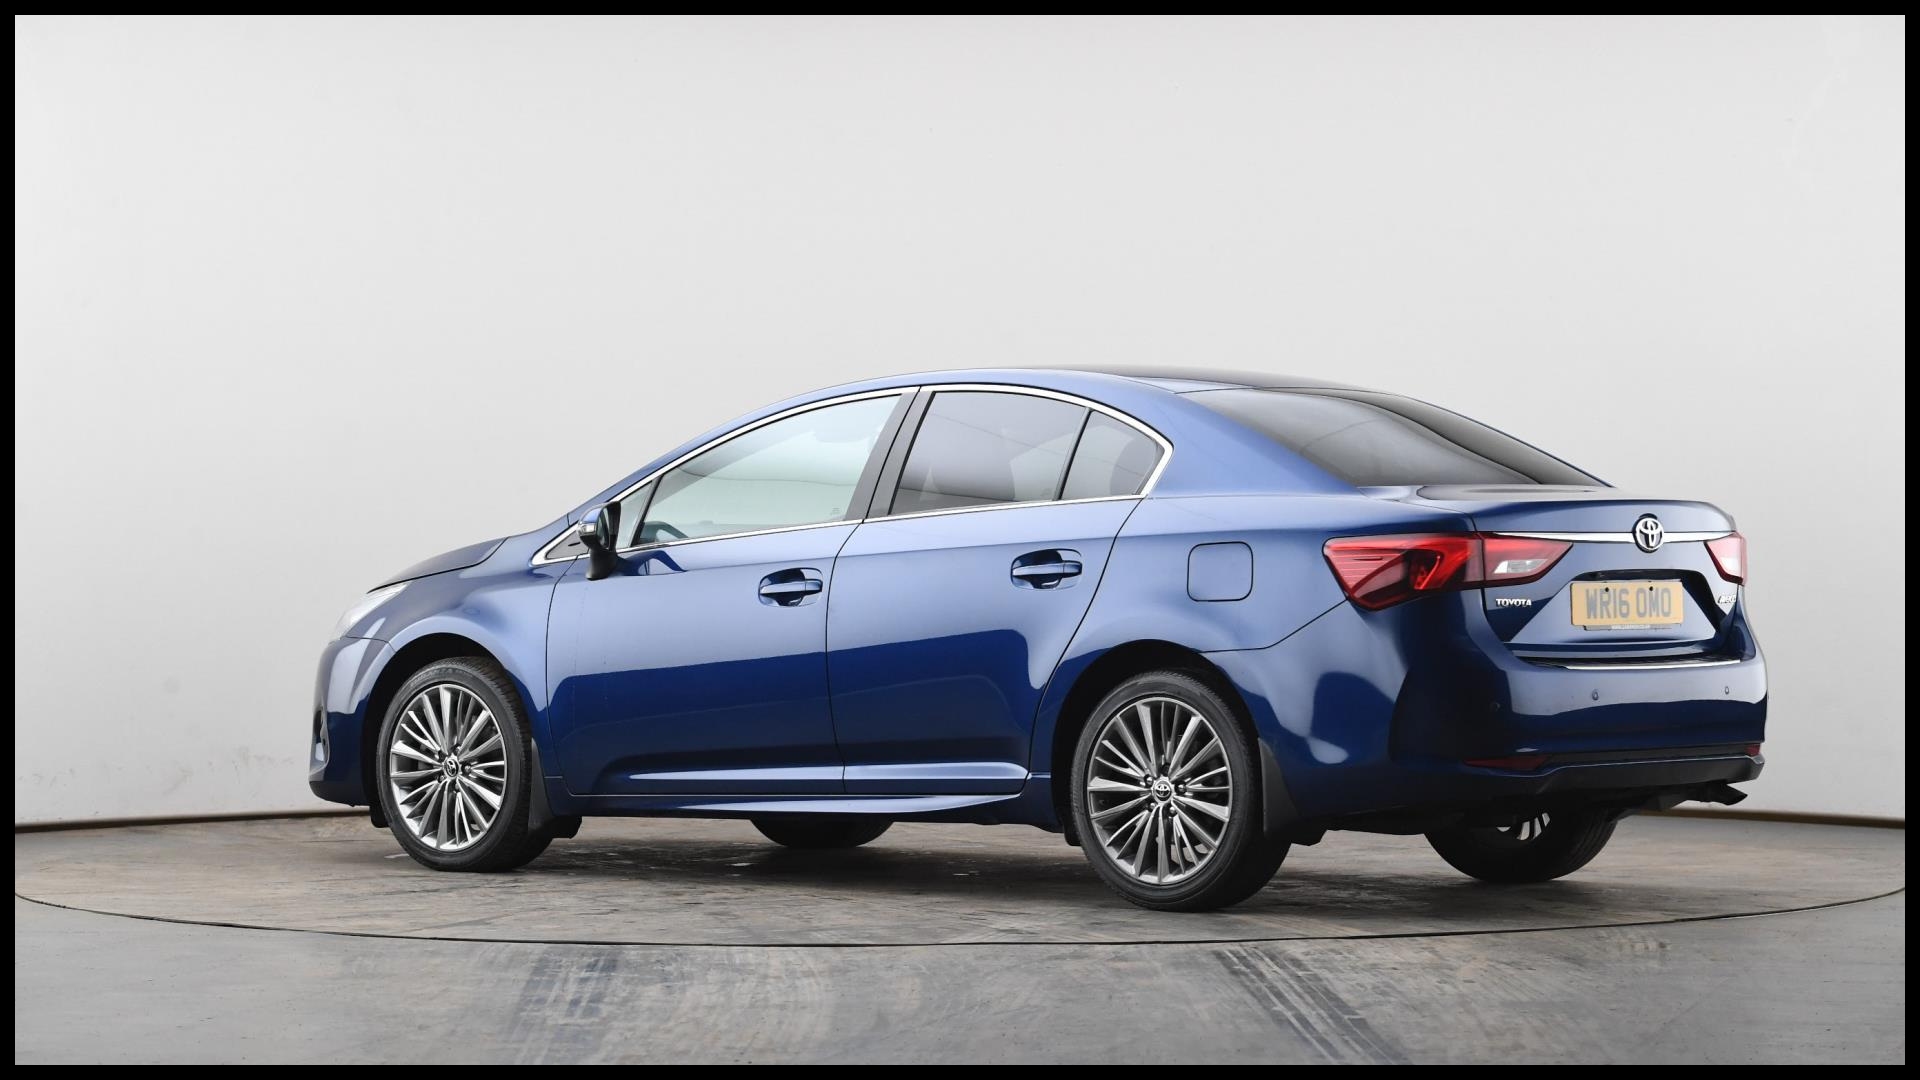 News Used toyota Avensis 2 0d Excel 4dr Blue Wr16omo Redesign